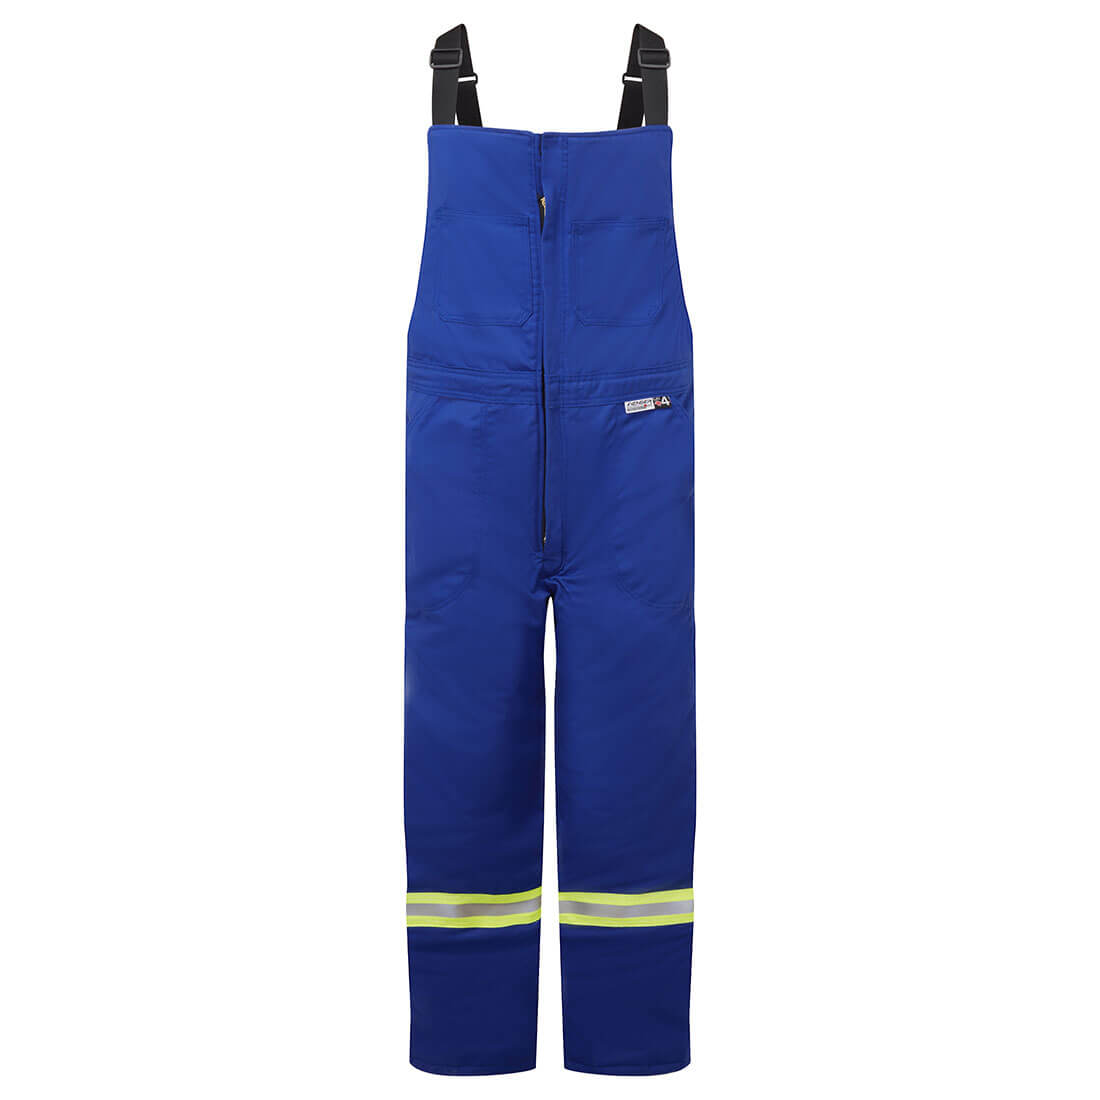 IFR Flame Resistant, Insulated Pants